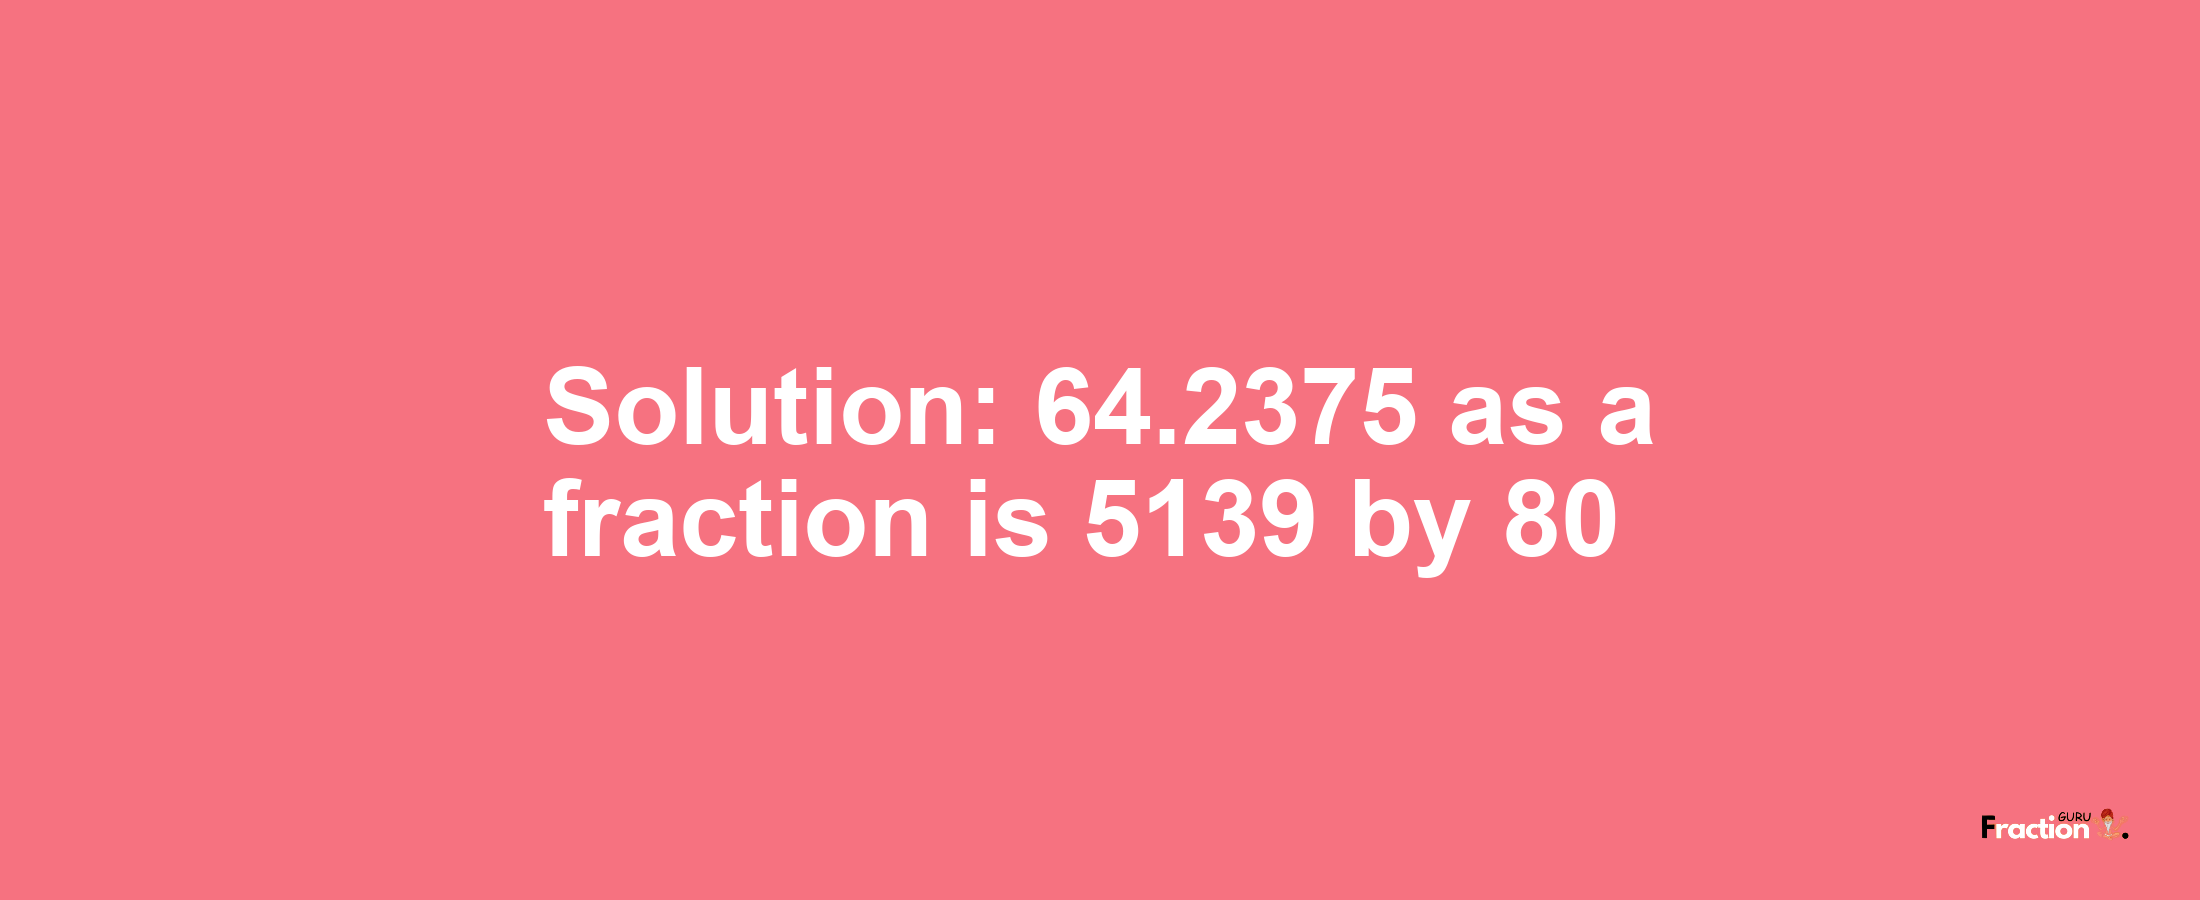 Solution:64.2375 as a fraction is 5139/80